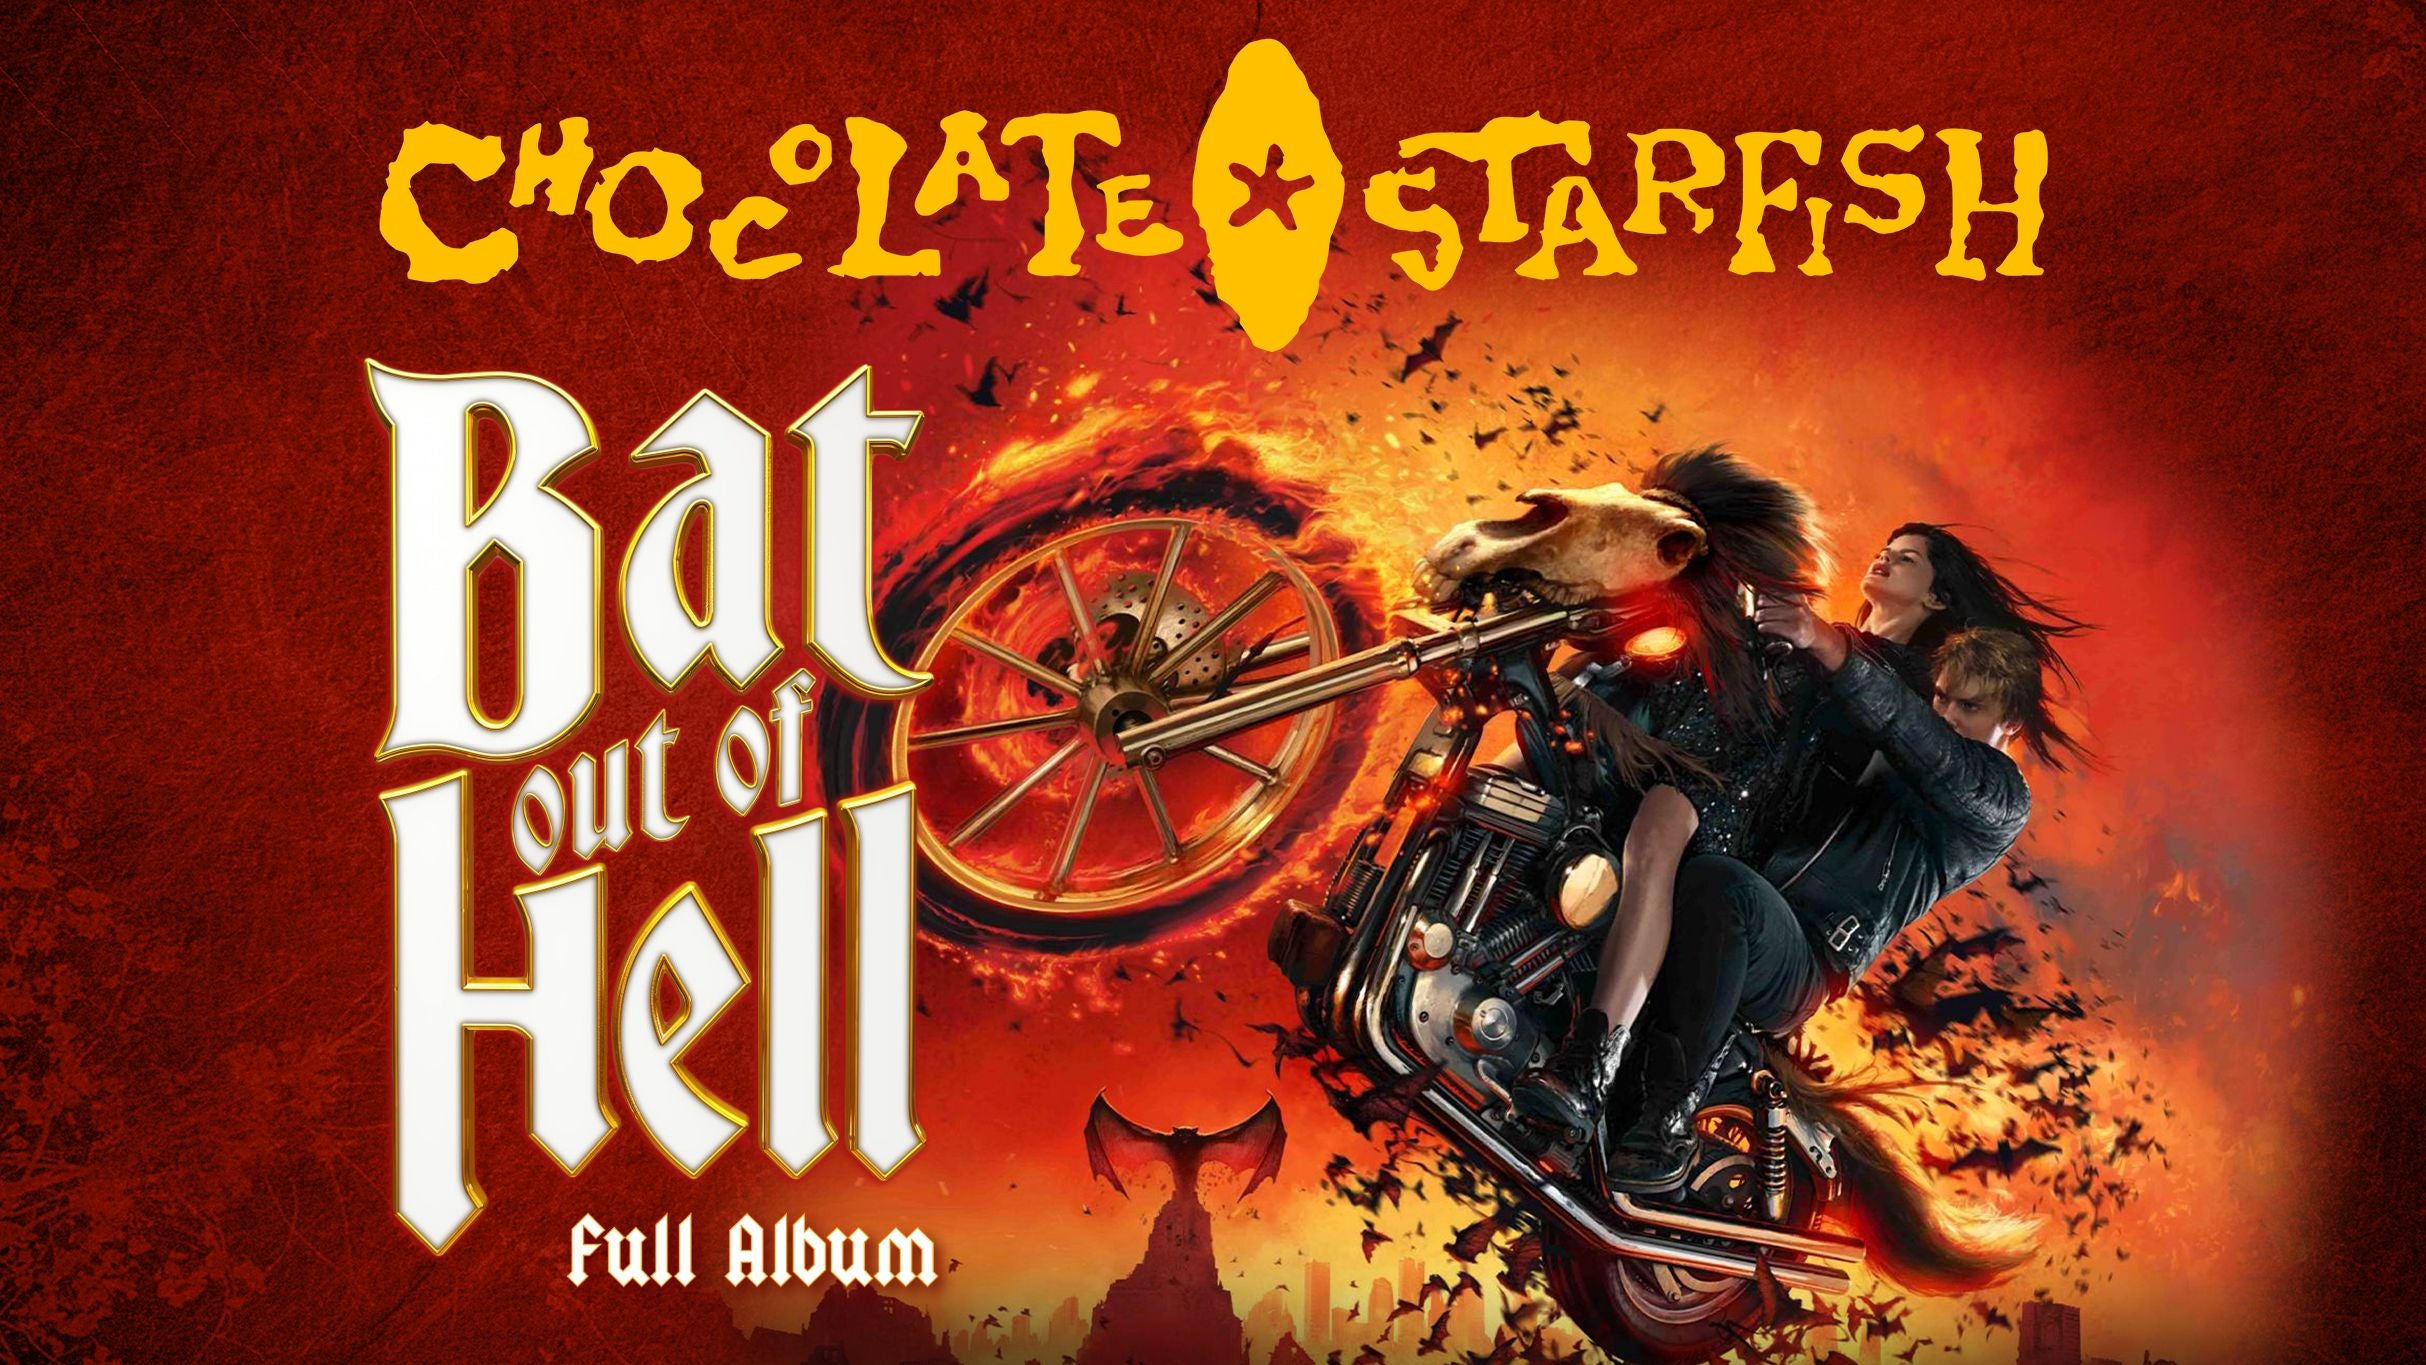 Image used with permission from Ticketmaster | CHOCOLATE STARFISH BAT OUT OF HELL 2023 tickets